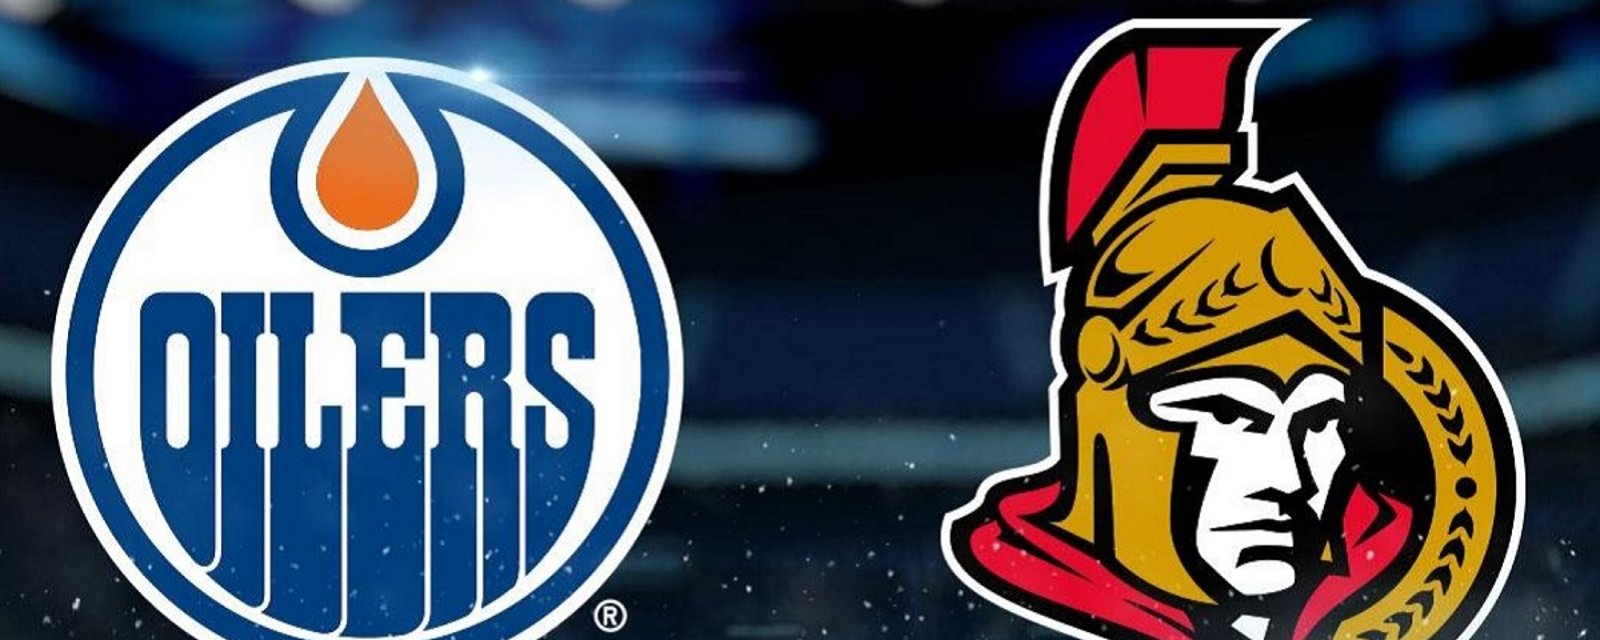 Breaking: Rumors of a potential trade between the Oilers and Sens.